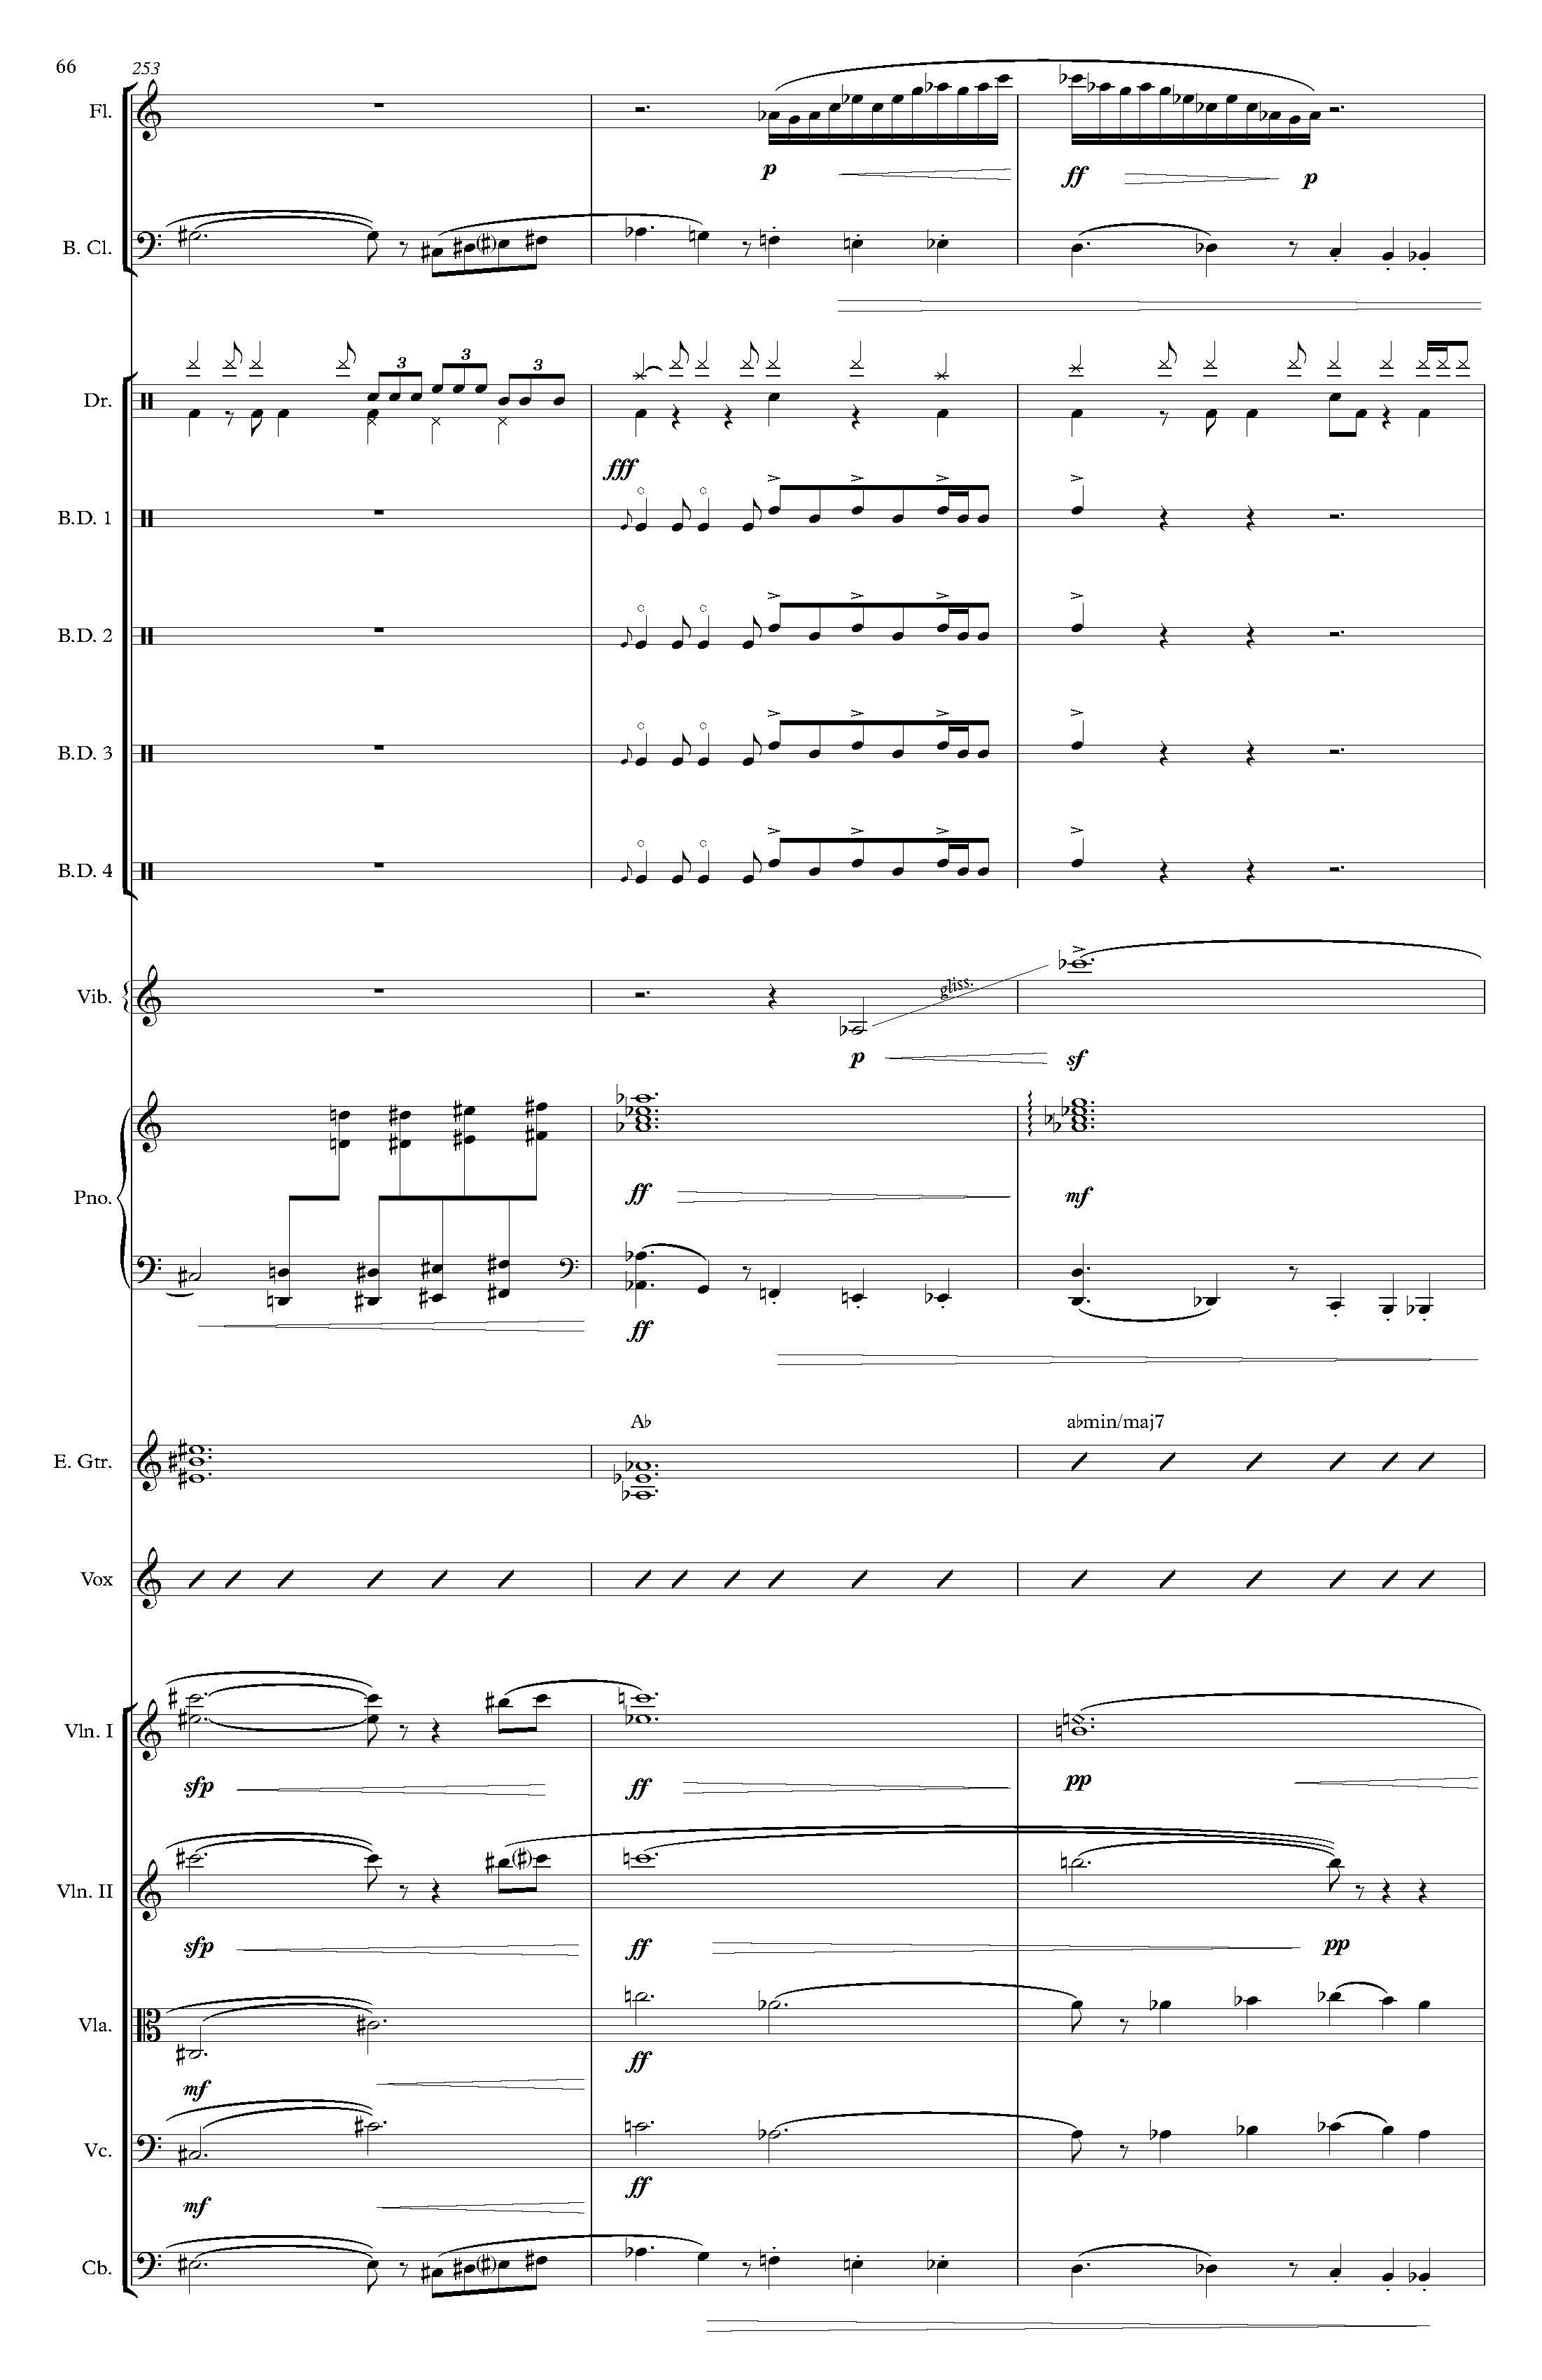 The Rembrandt of Avenue A - Complete Score_Page_72.jpg